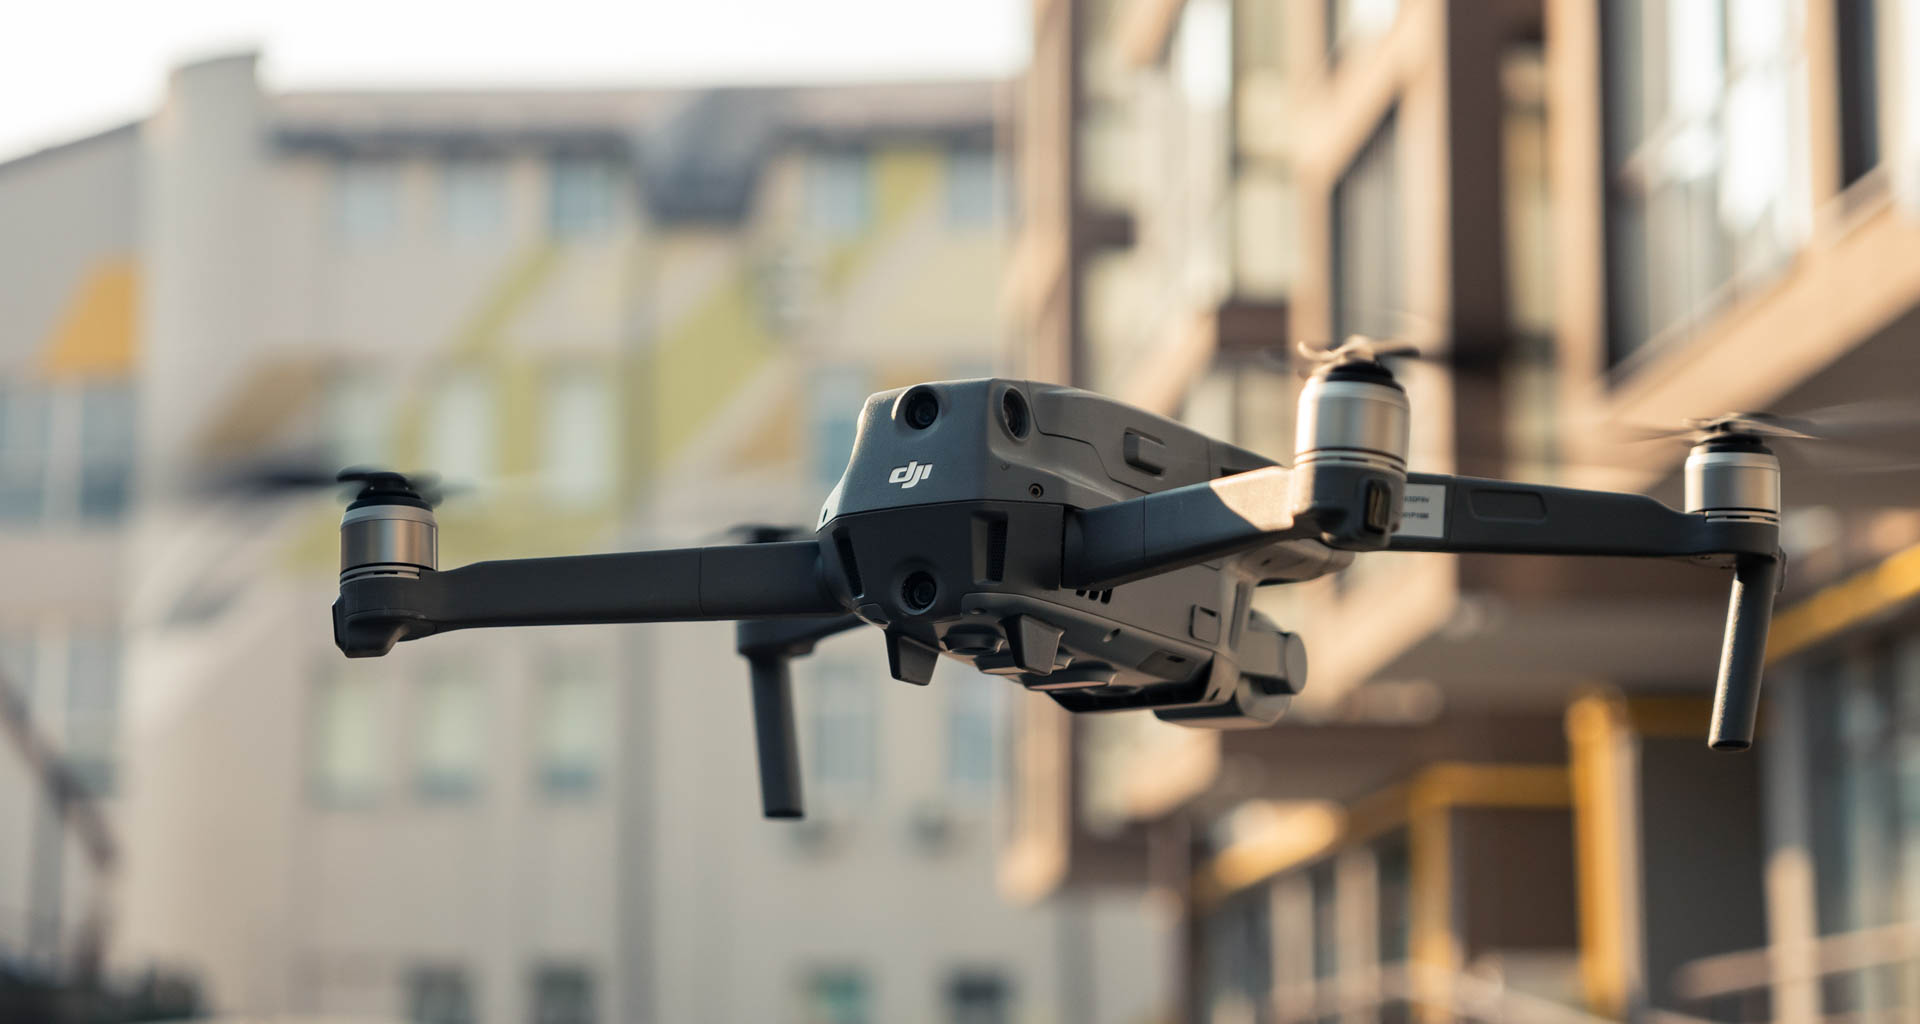 The plummeting cost and rapidly advancing capabilities of drone technology are presenting a major opportunity in the PropTech space. Image: Roman Koval from Pexels.